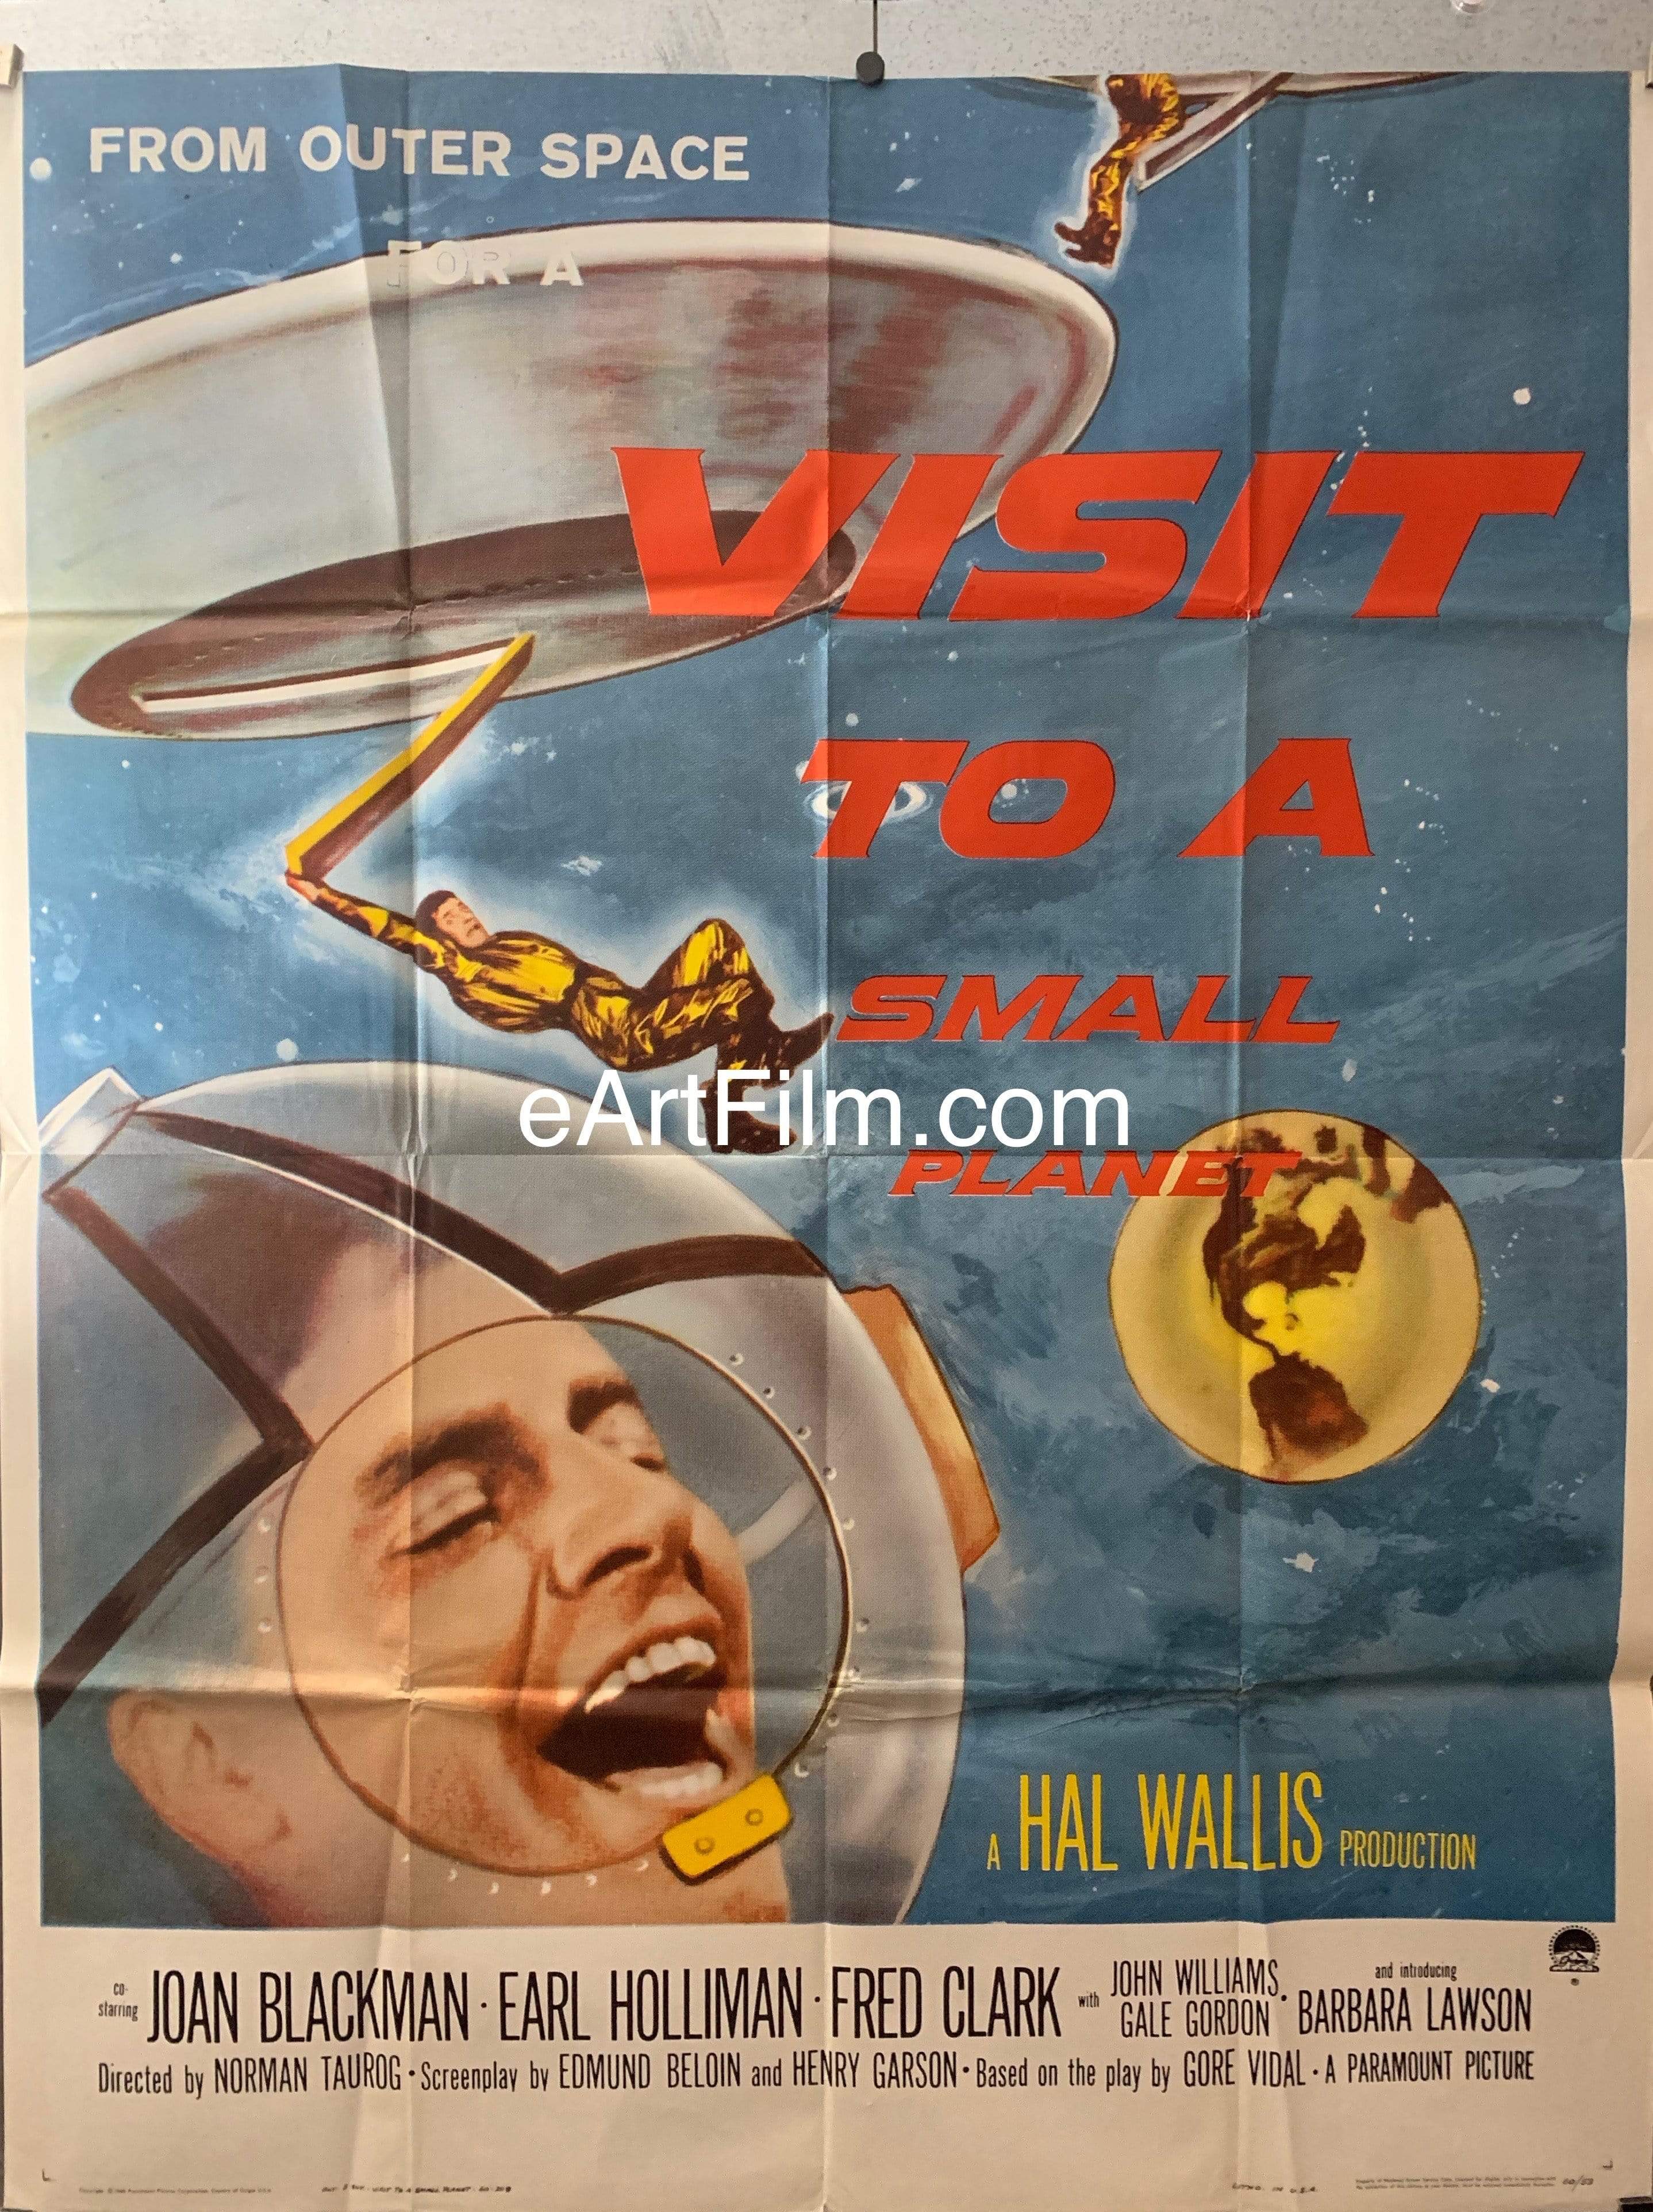 jerry lewis movie posters